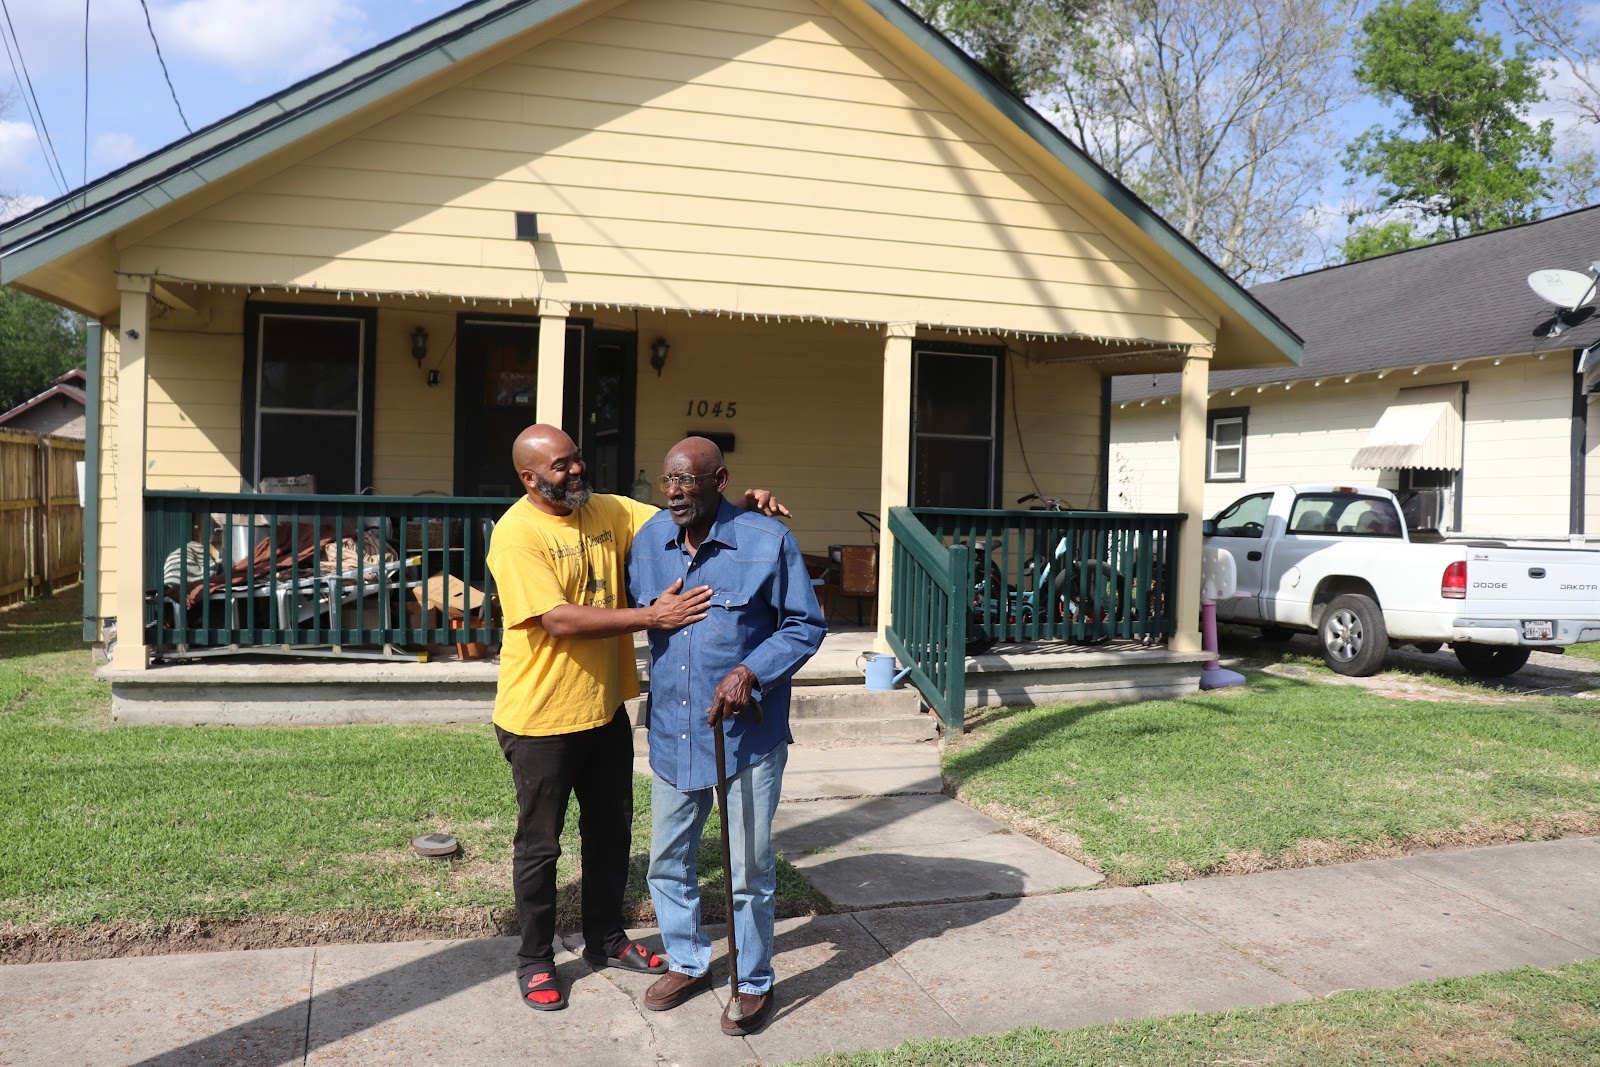 A man in black jeans and a yellow shirt embraces a man in jeans and a blue long-sleeved shirt holding a cane, in front of a yellow house.